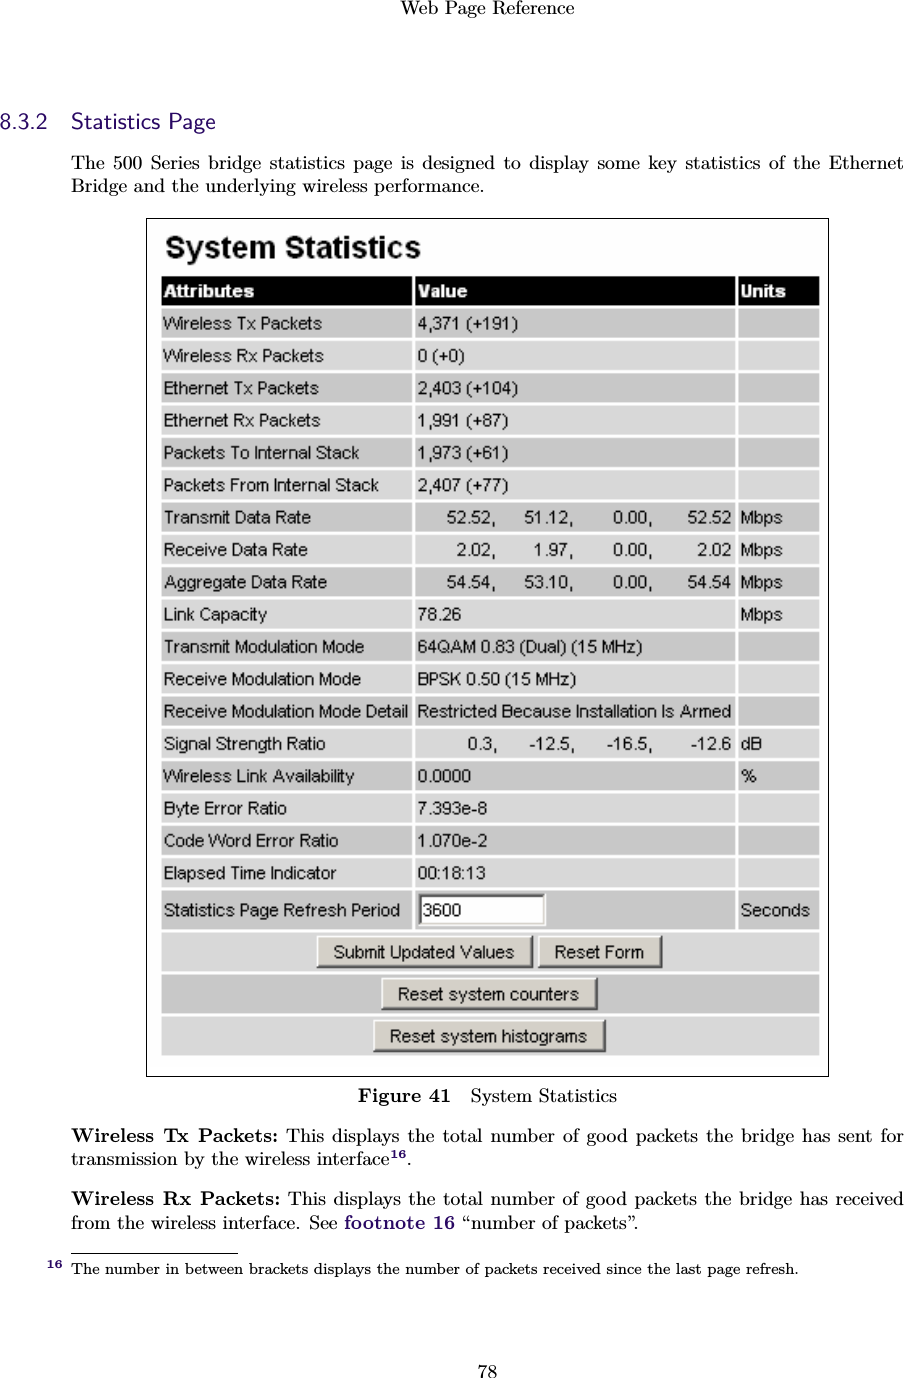 Web Page Reference788.3.2 Statistics PageThe 500 Series bridge statistics page is designed to display some key statistics of the EthernetBridge and the underlying wireless performance.Figure 41 System StatisticsWireless Tx Packets: This displays the total number of good packets the bridge has sent fortransmission by the wireless interface16.Wireless Rx Packets: This displays the total number of good packets the bridge has receivedfrom the wireless interface. See footnote 16 “number of packets”.The number in between brackets displays the number of packets received since the last page refresh.16